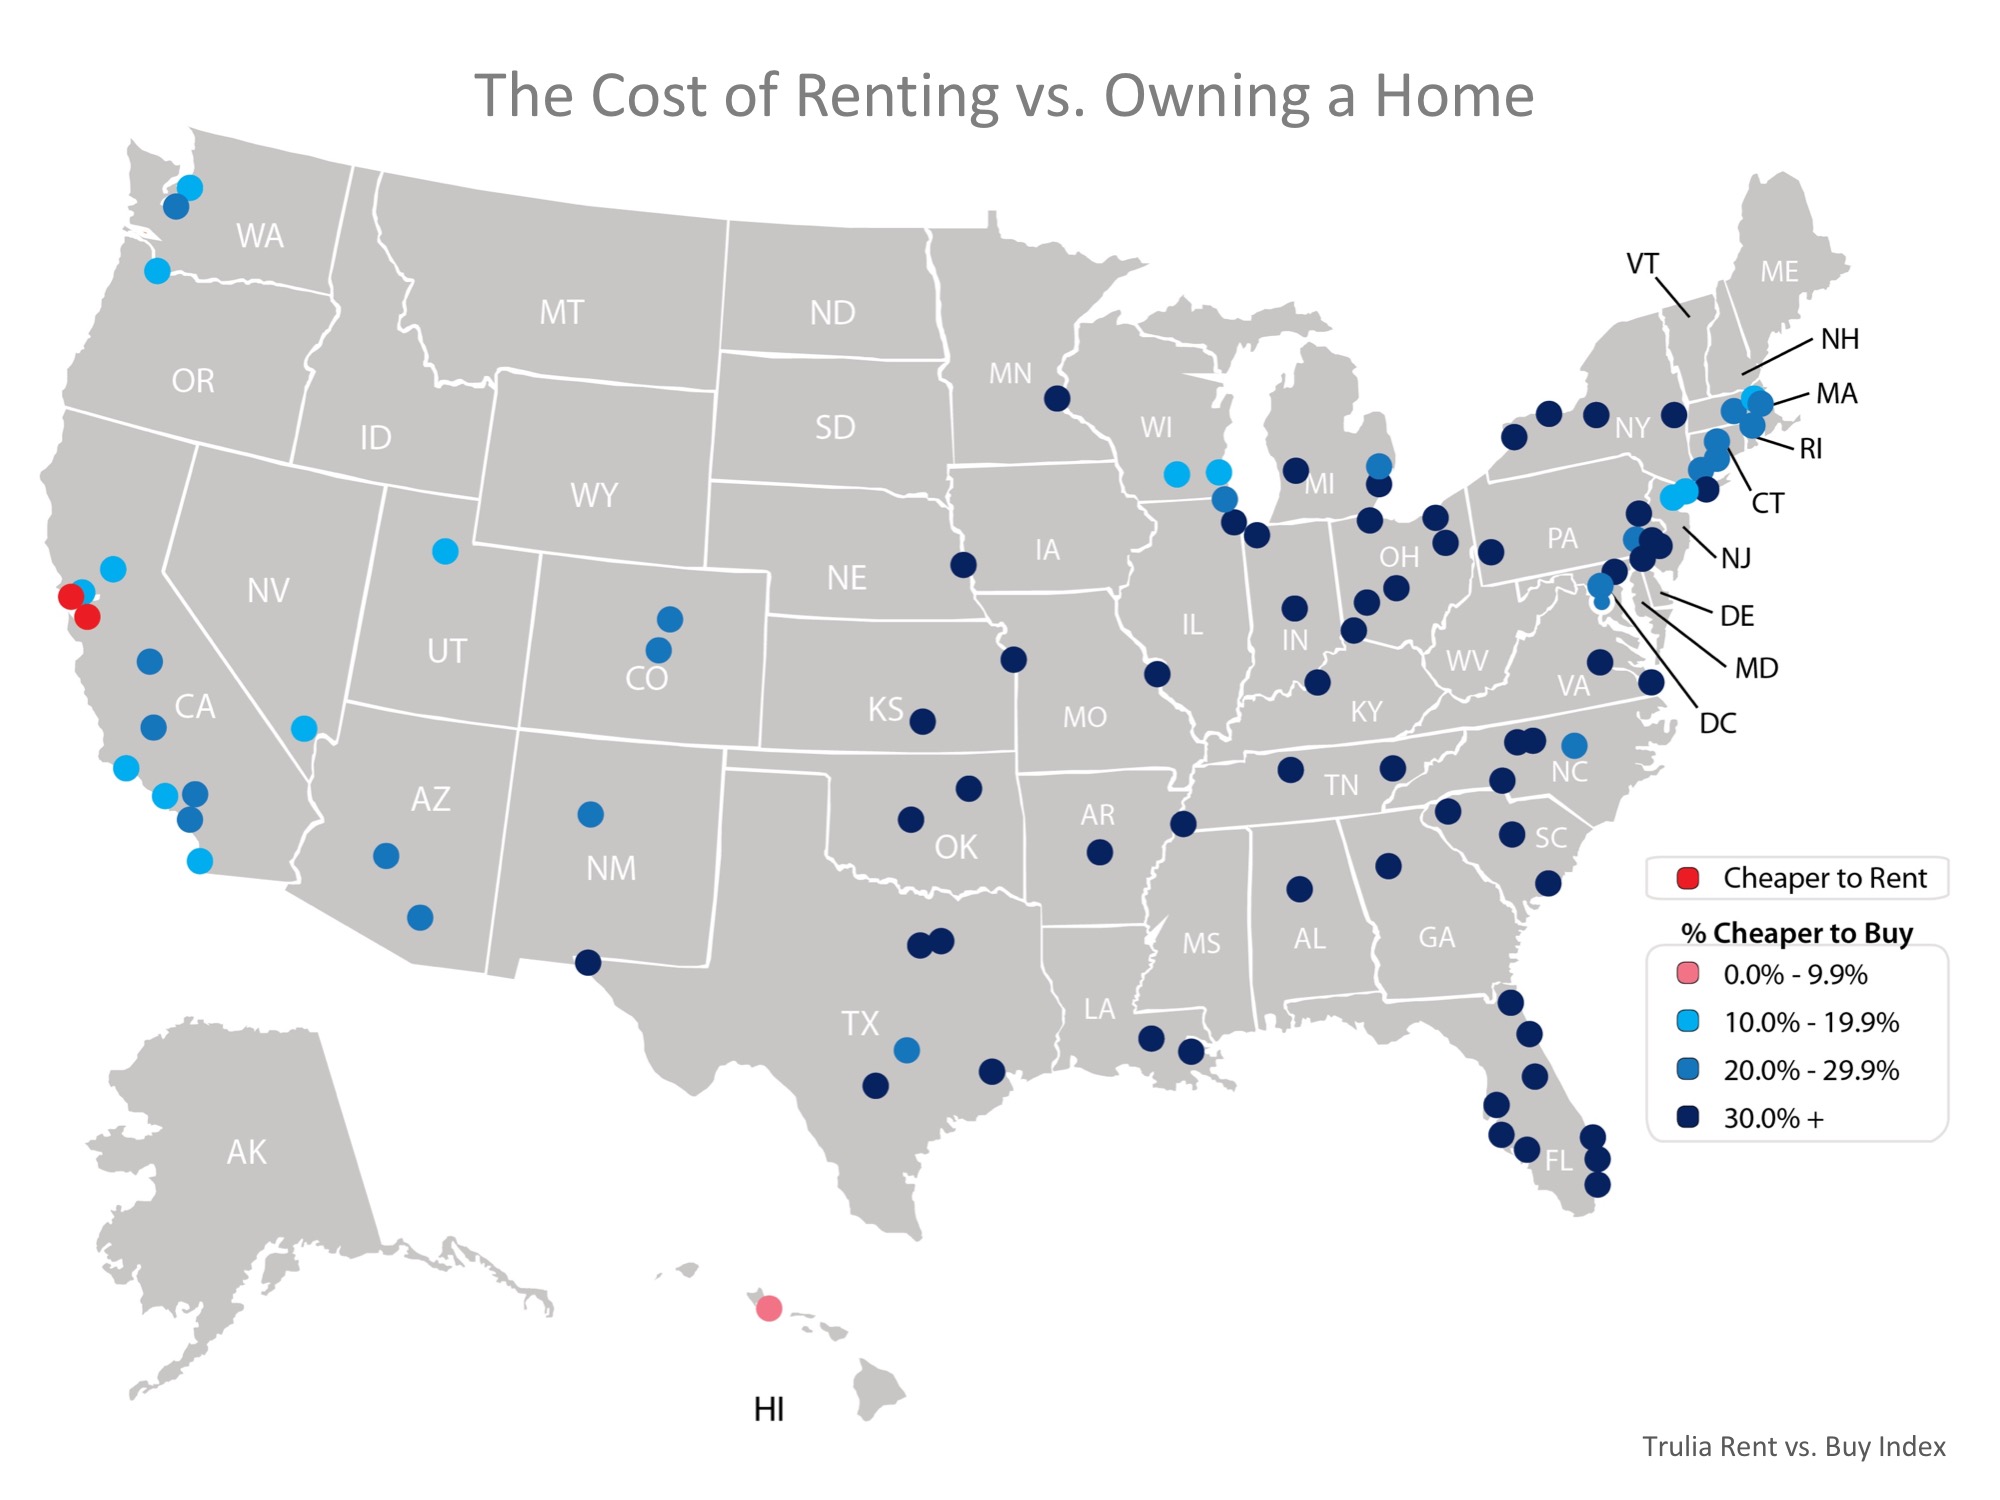 Buying Is Now 26.3% Cheaper Than Renting in the US | MyKCM